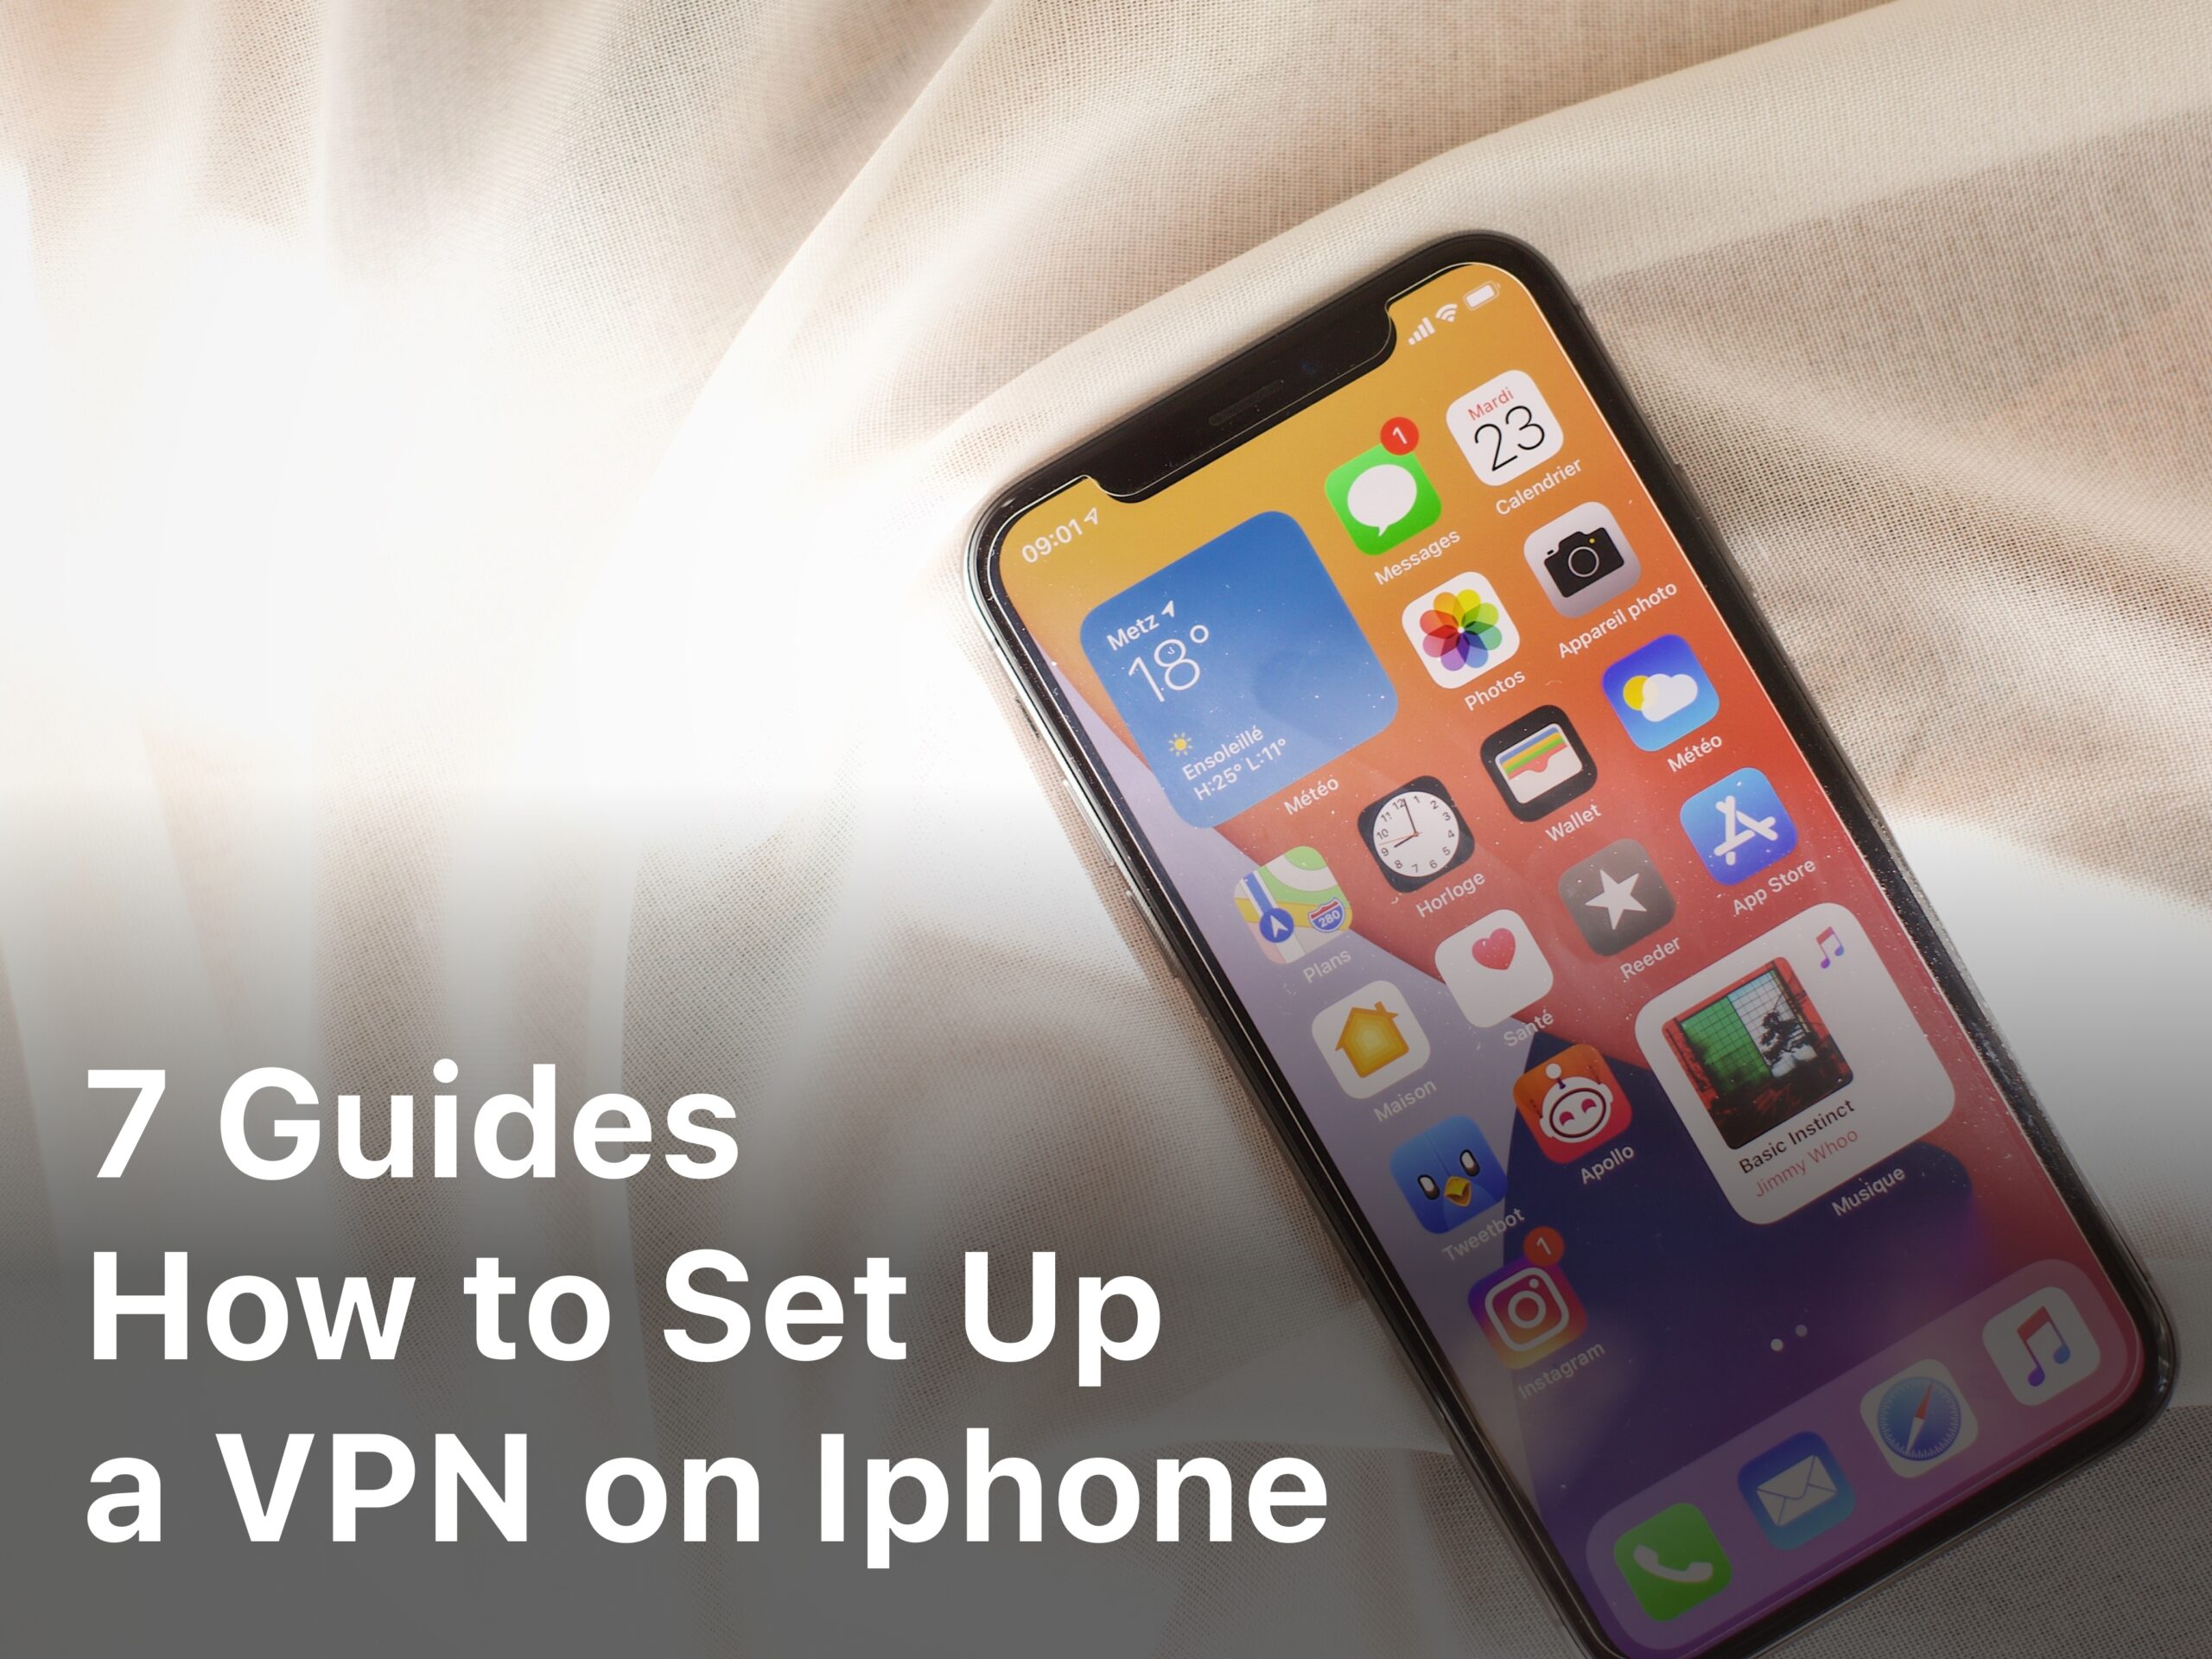 Set up a VPN on Iphone